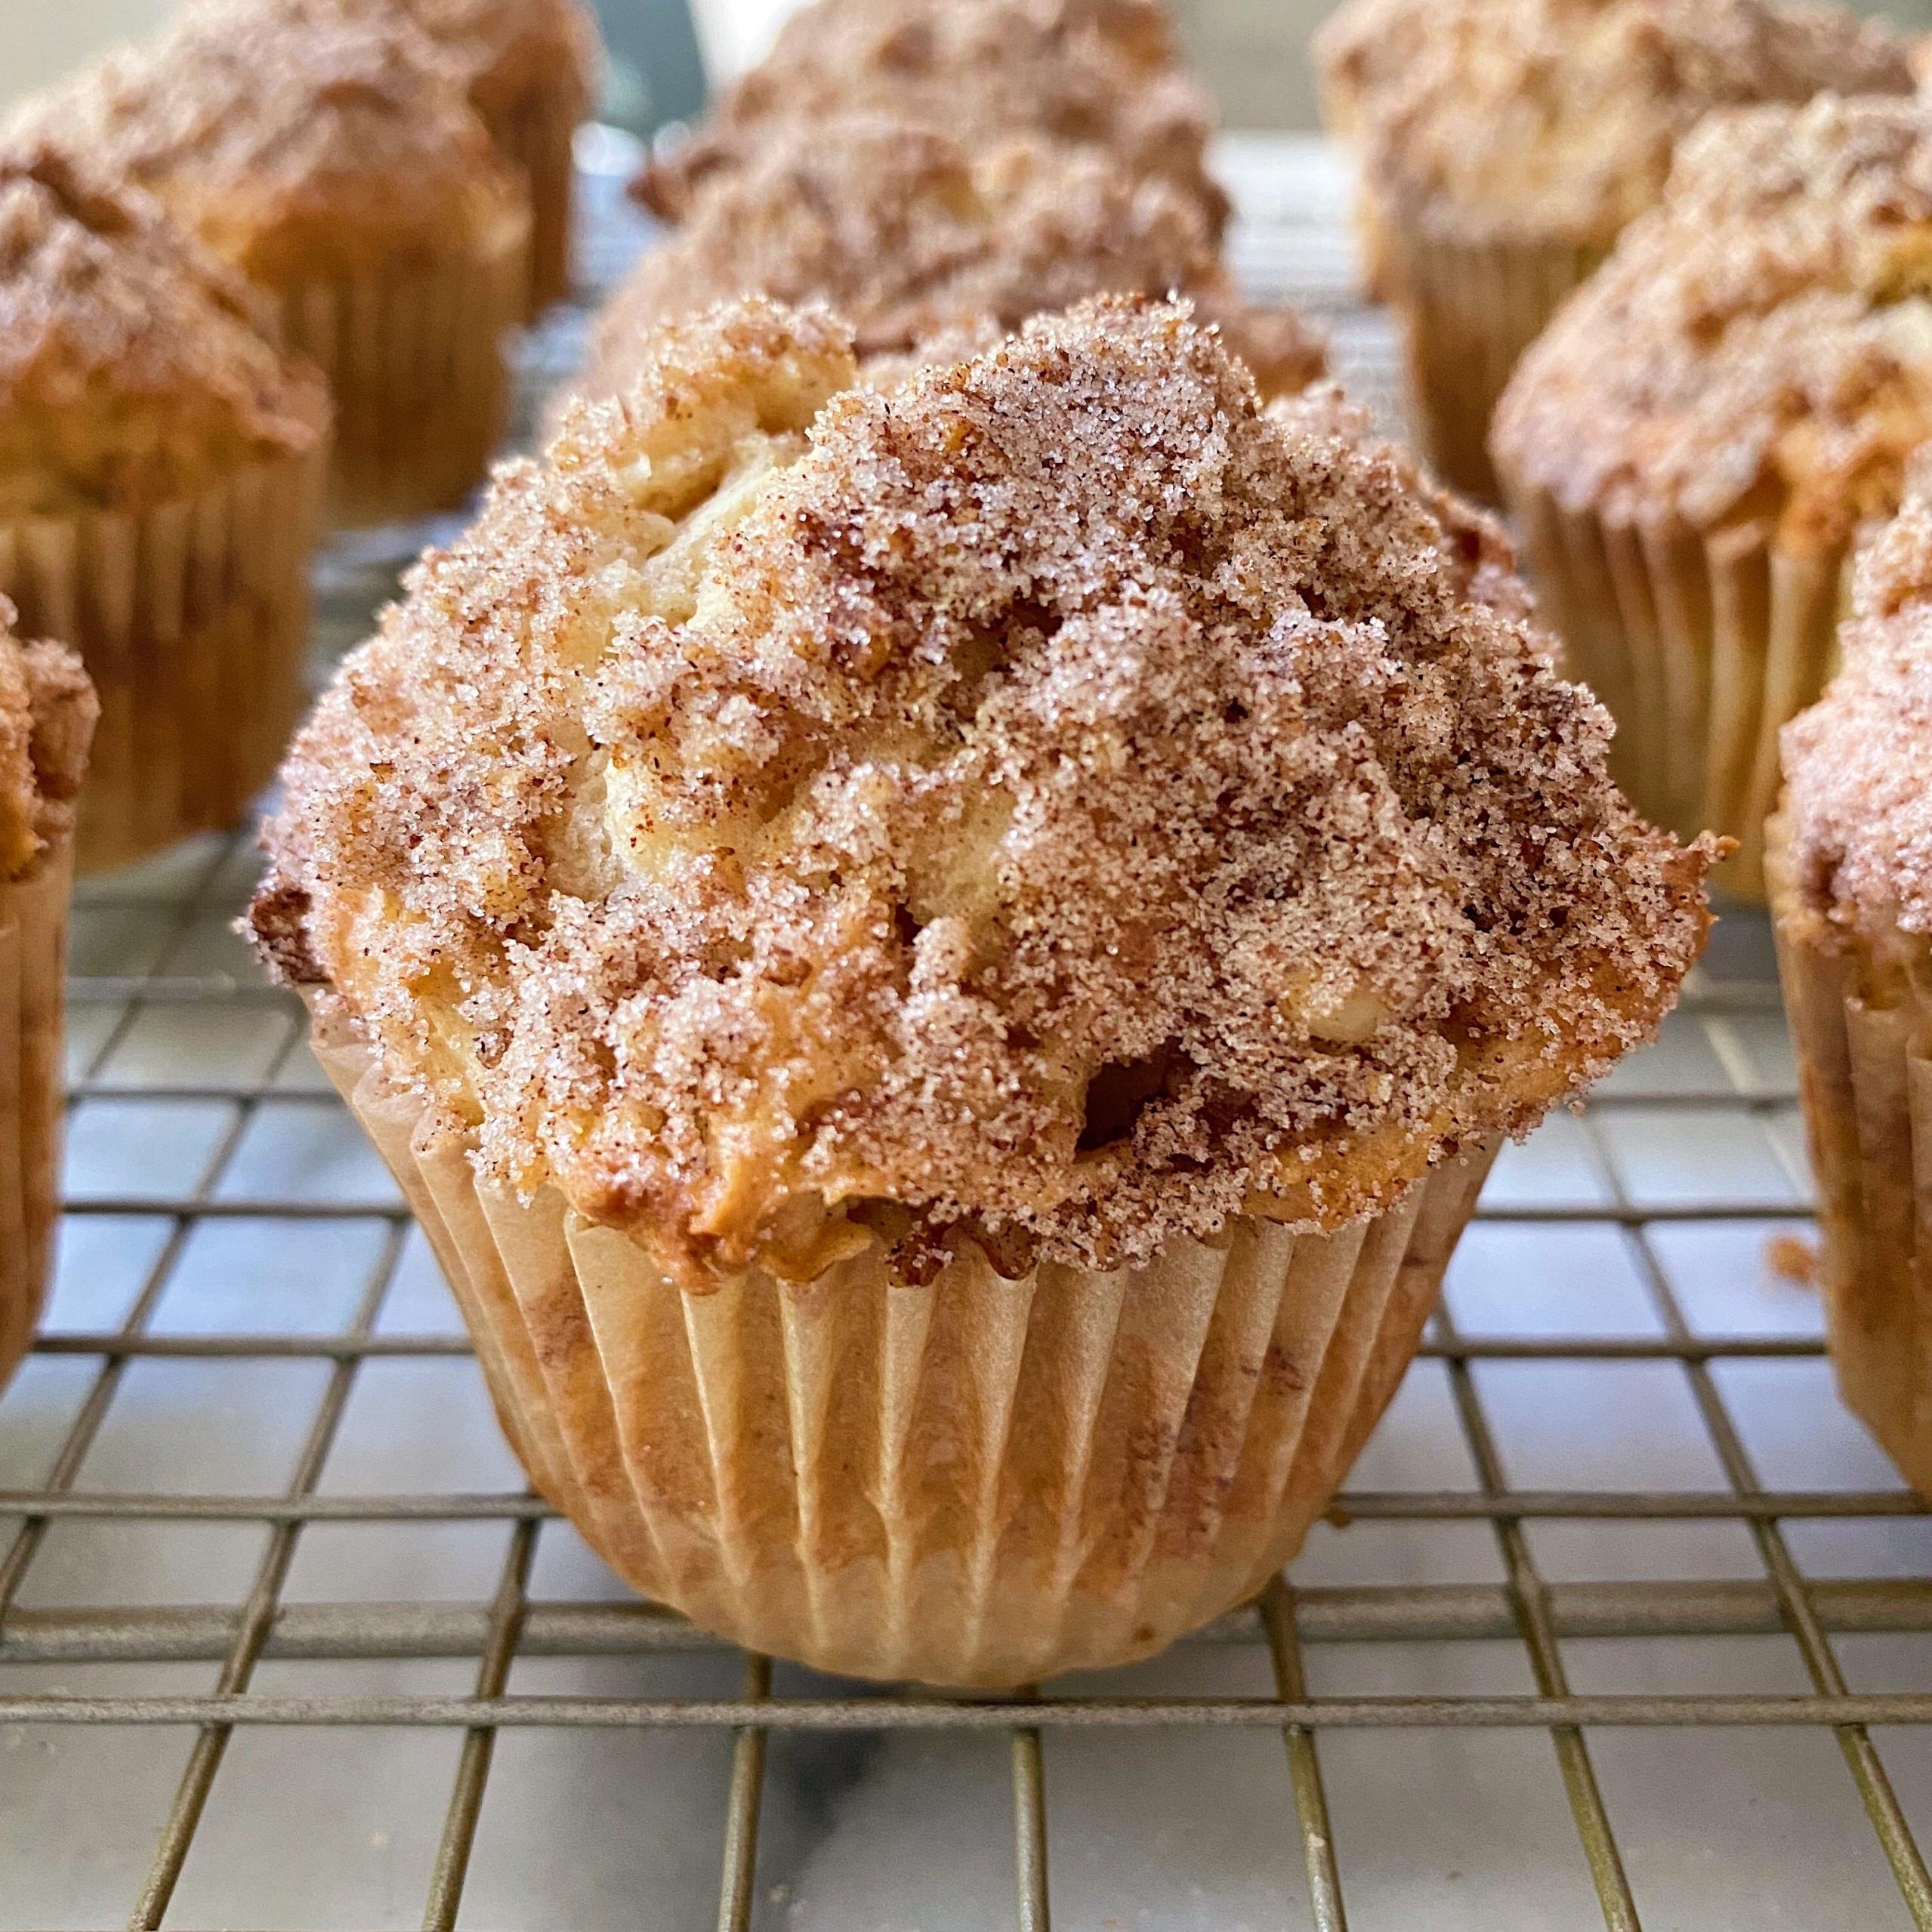  These muffins are the perfect balance of sweetness and spice.